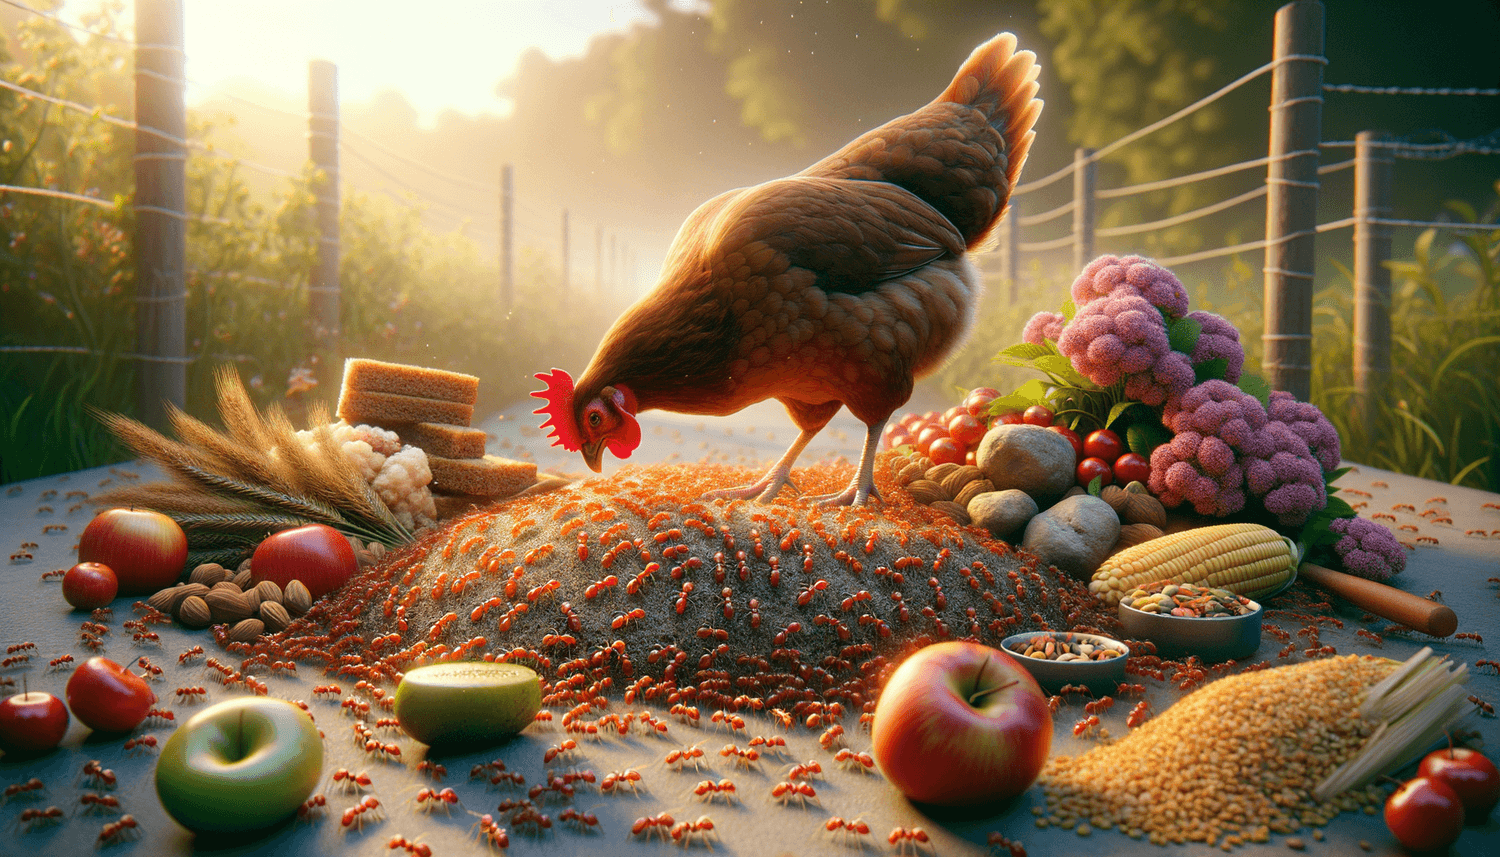 Can Chickens Eat Red Ants?